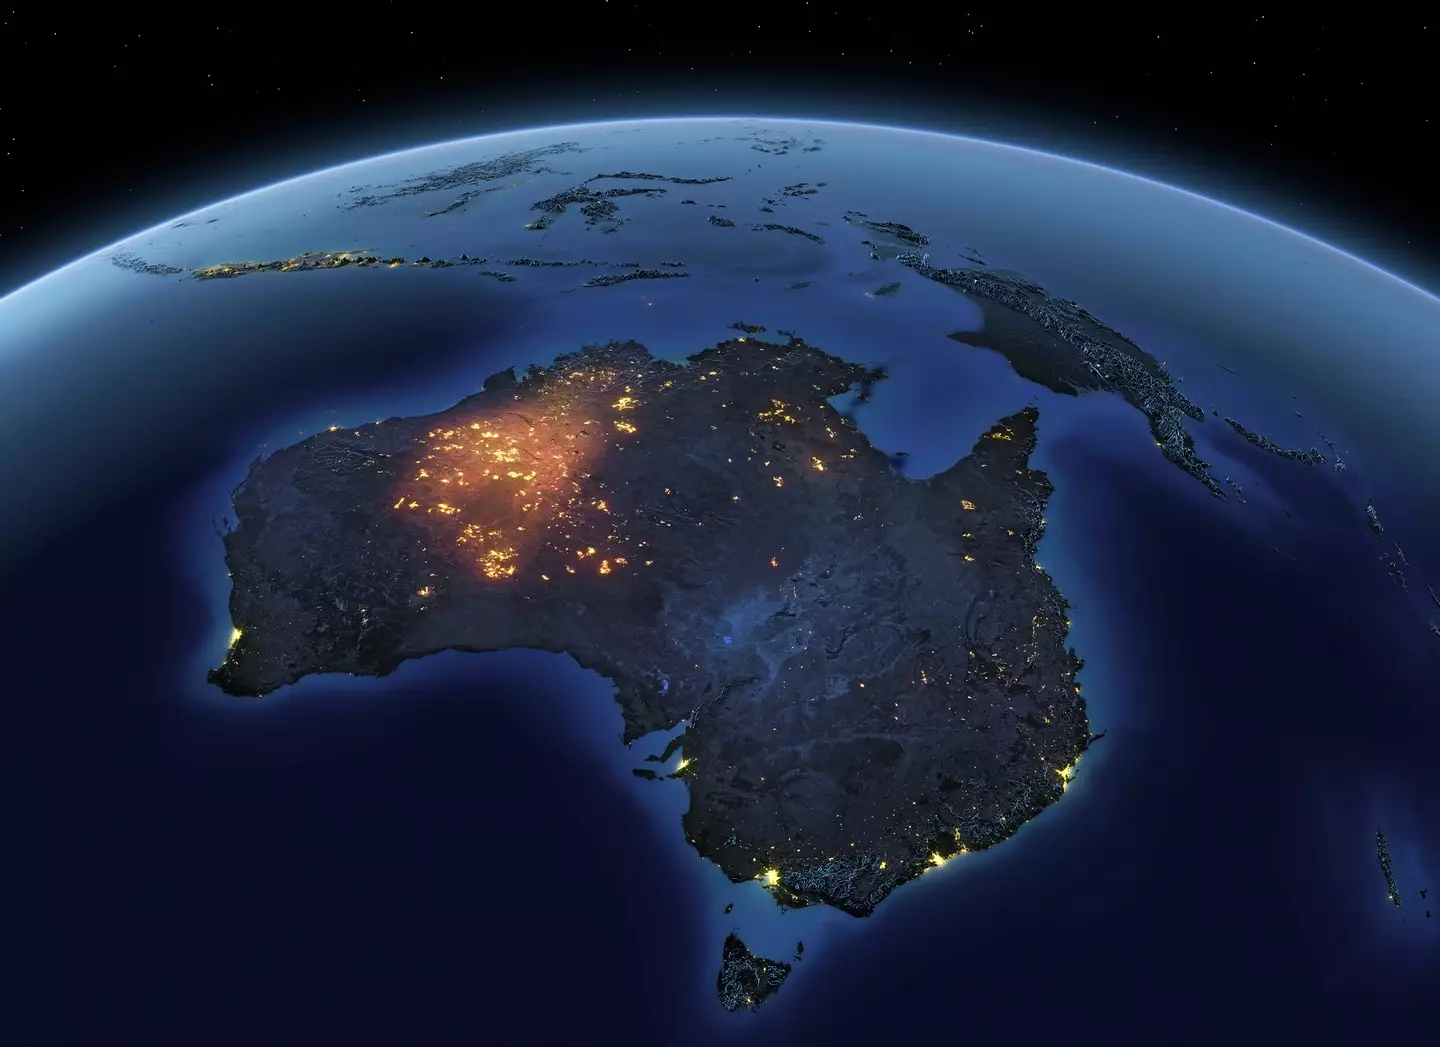 The structure has been found buried underneath Australia.